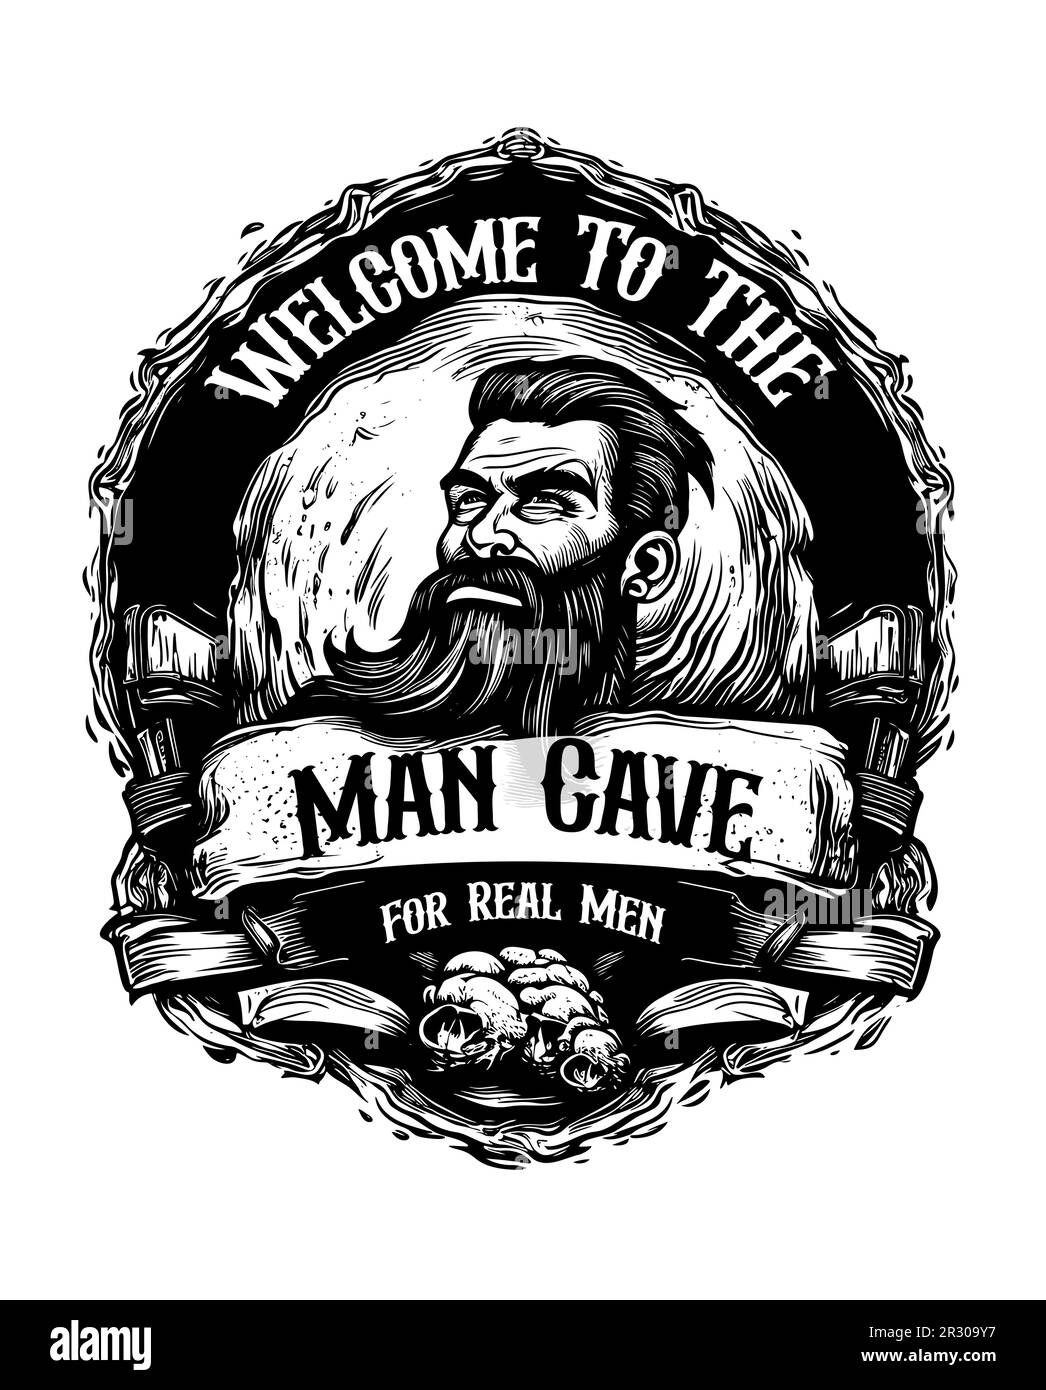 The Man Cave  - Vector illustration Stock Vector